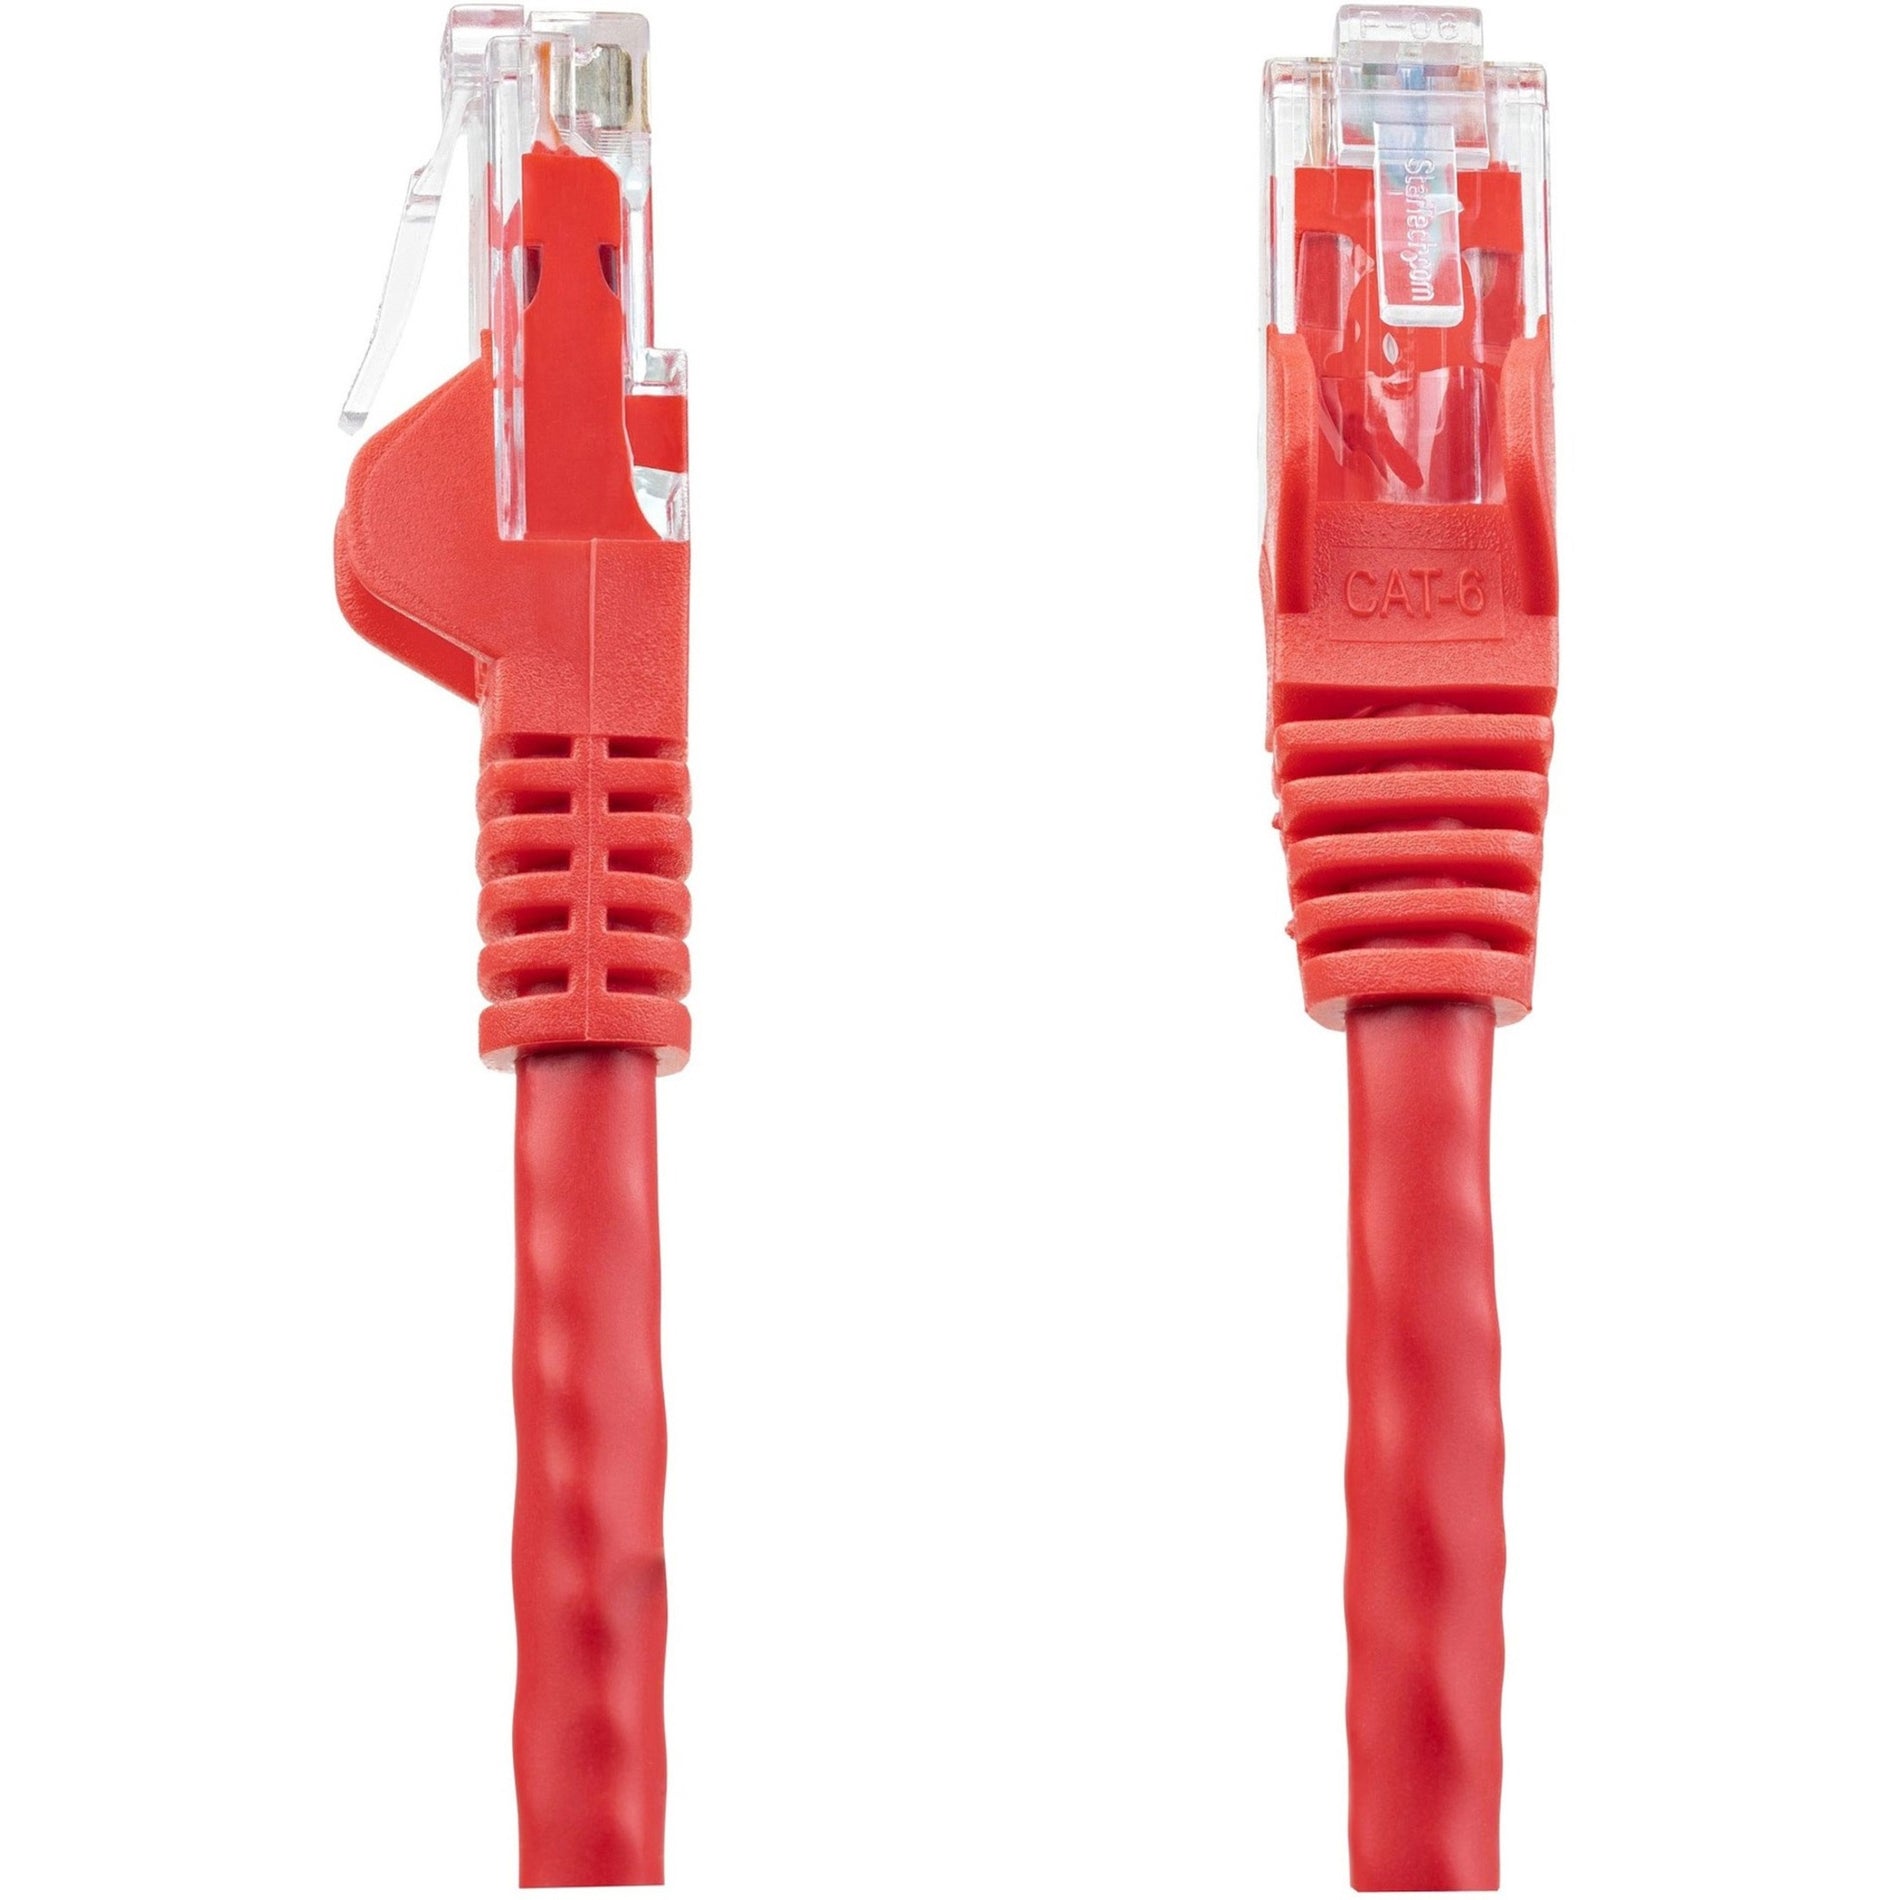 StarTech.com N6PATCH9RD Cat6 Patch Cable, 9 ft Red Ethernet Cable, Snagless RJ45 Connectors